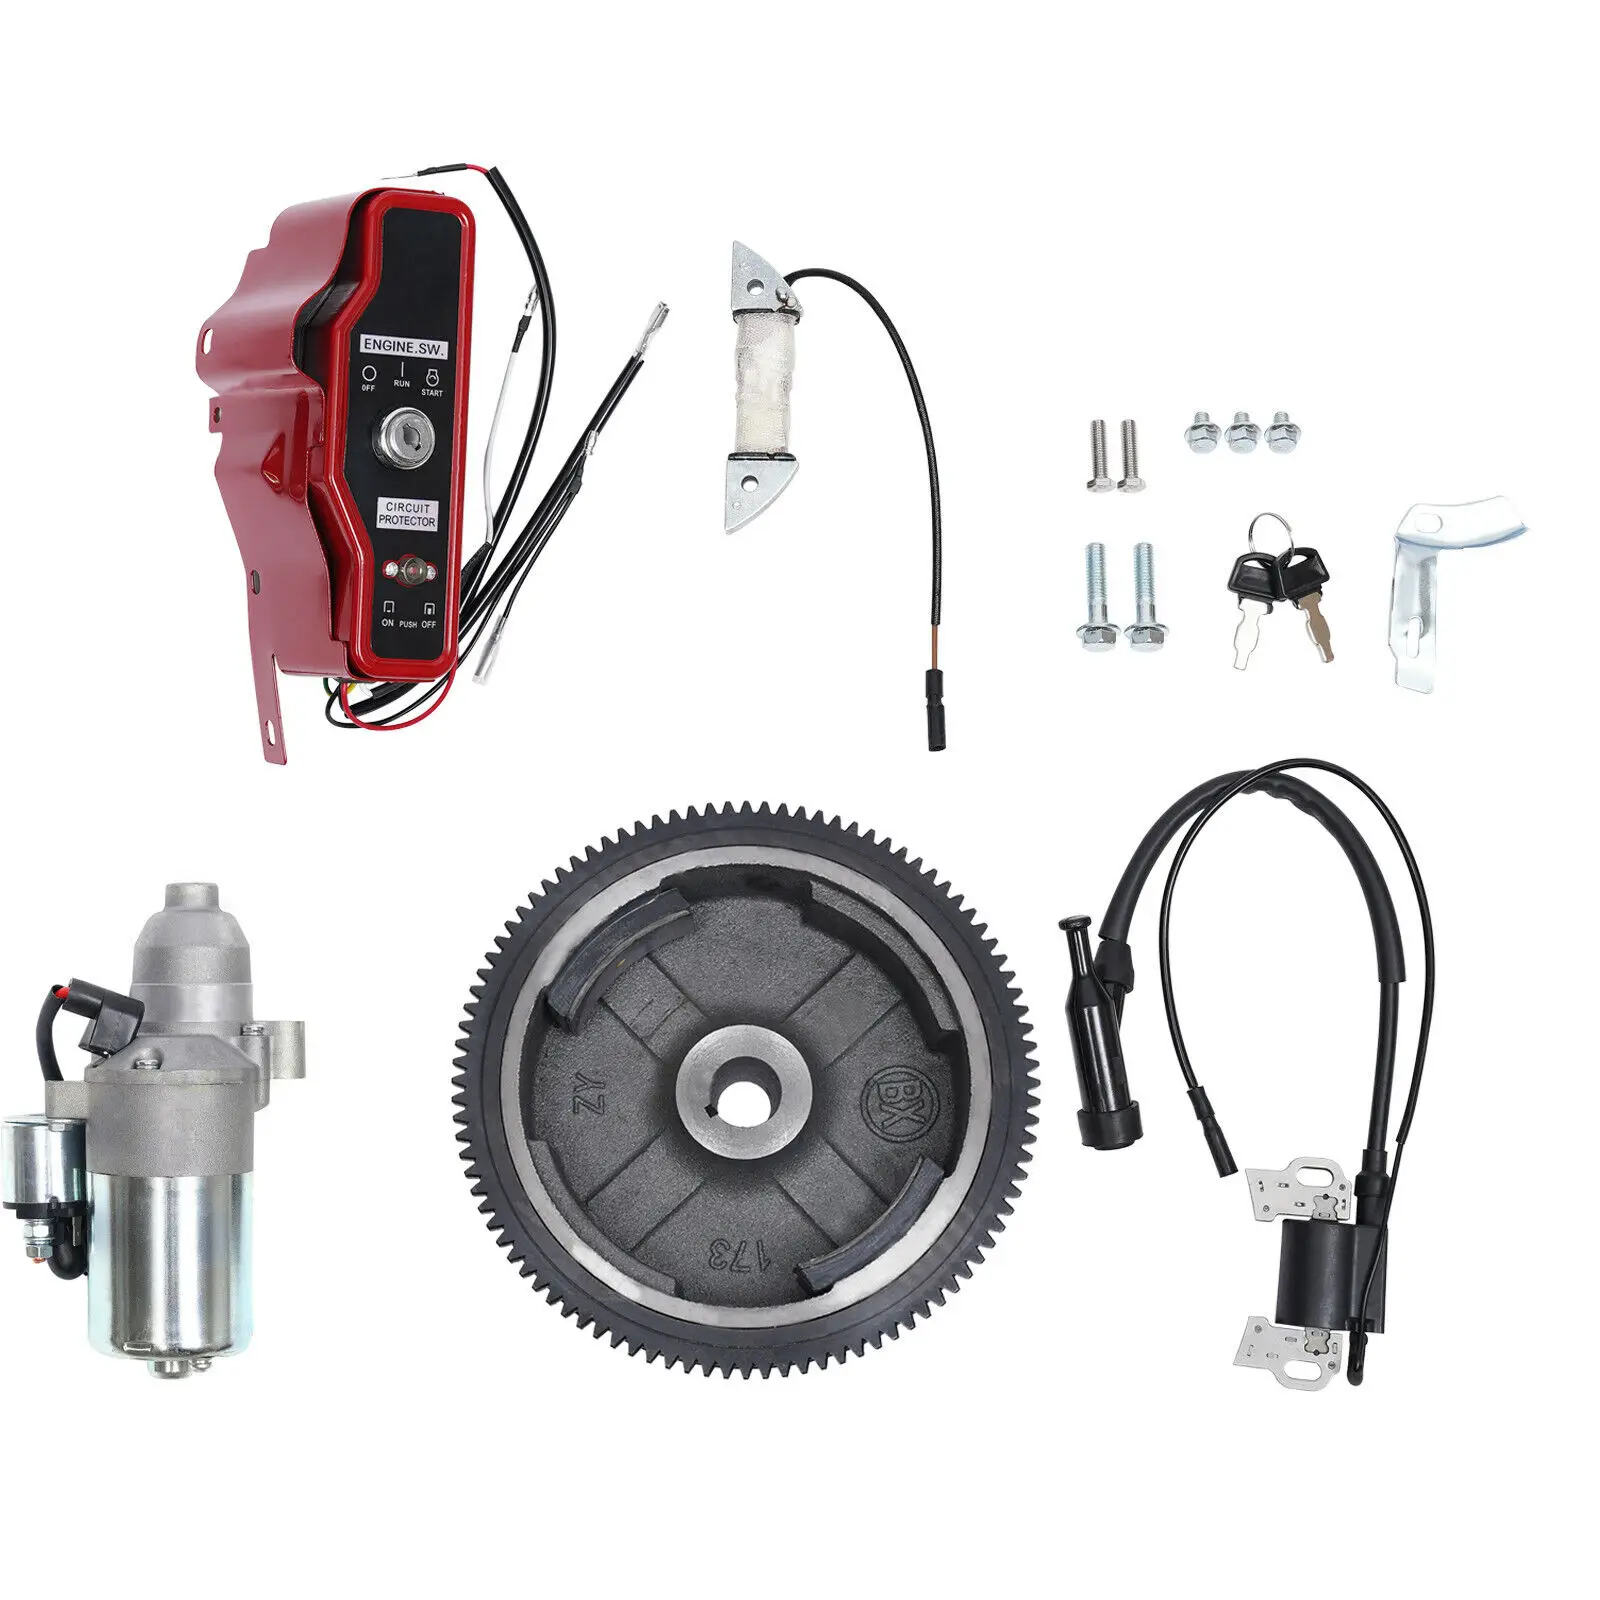 Electric Starter Motor Kit Recoil Ignition Coil Flywheel For Honda GX240 GX270 ignition coil for honda gx340 11hp